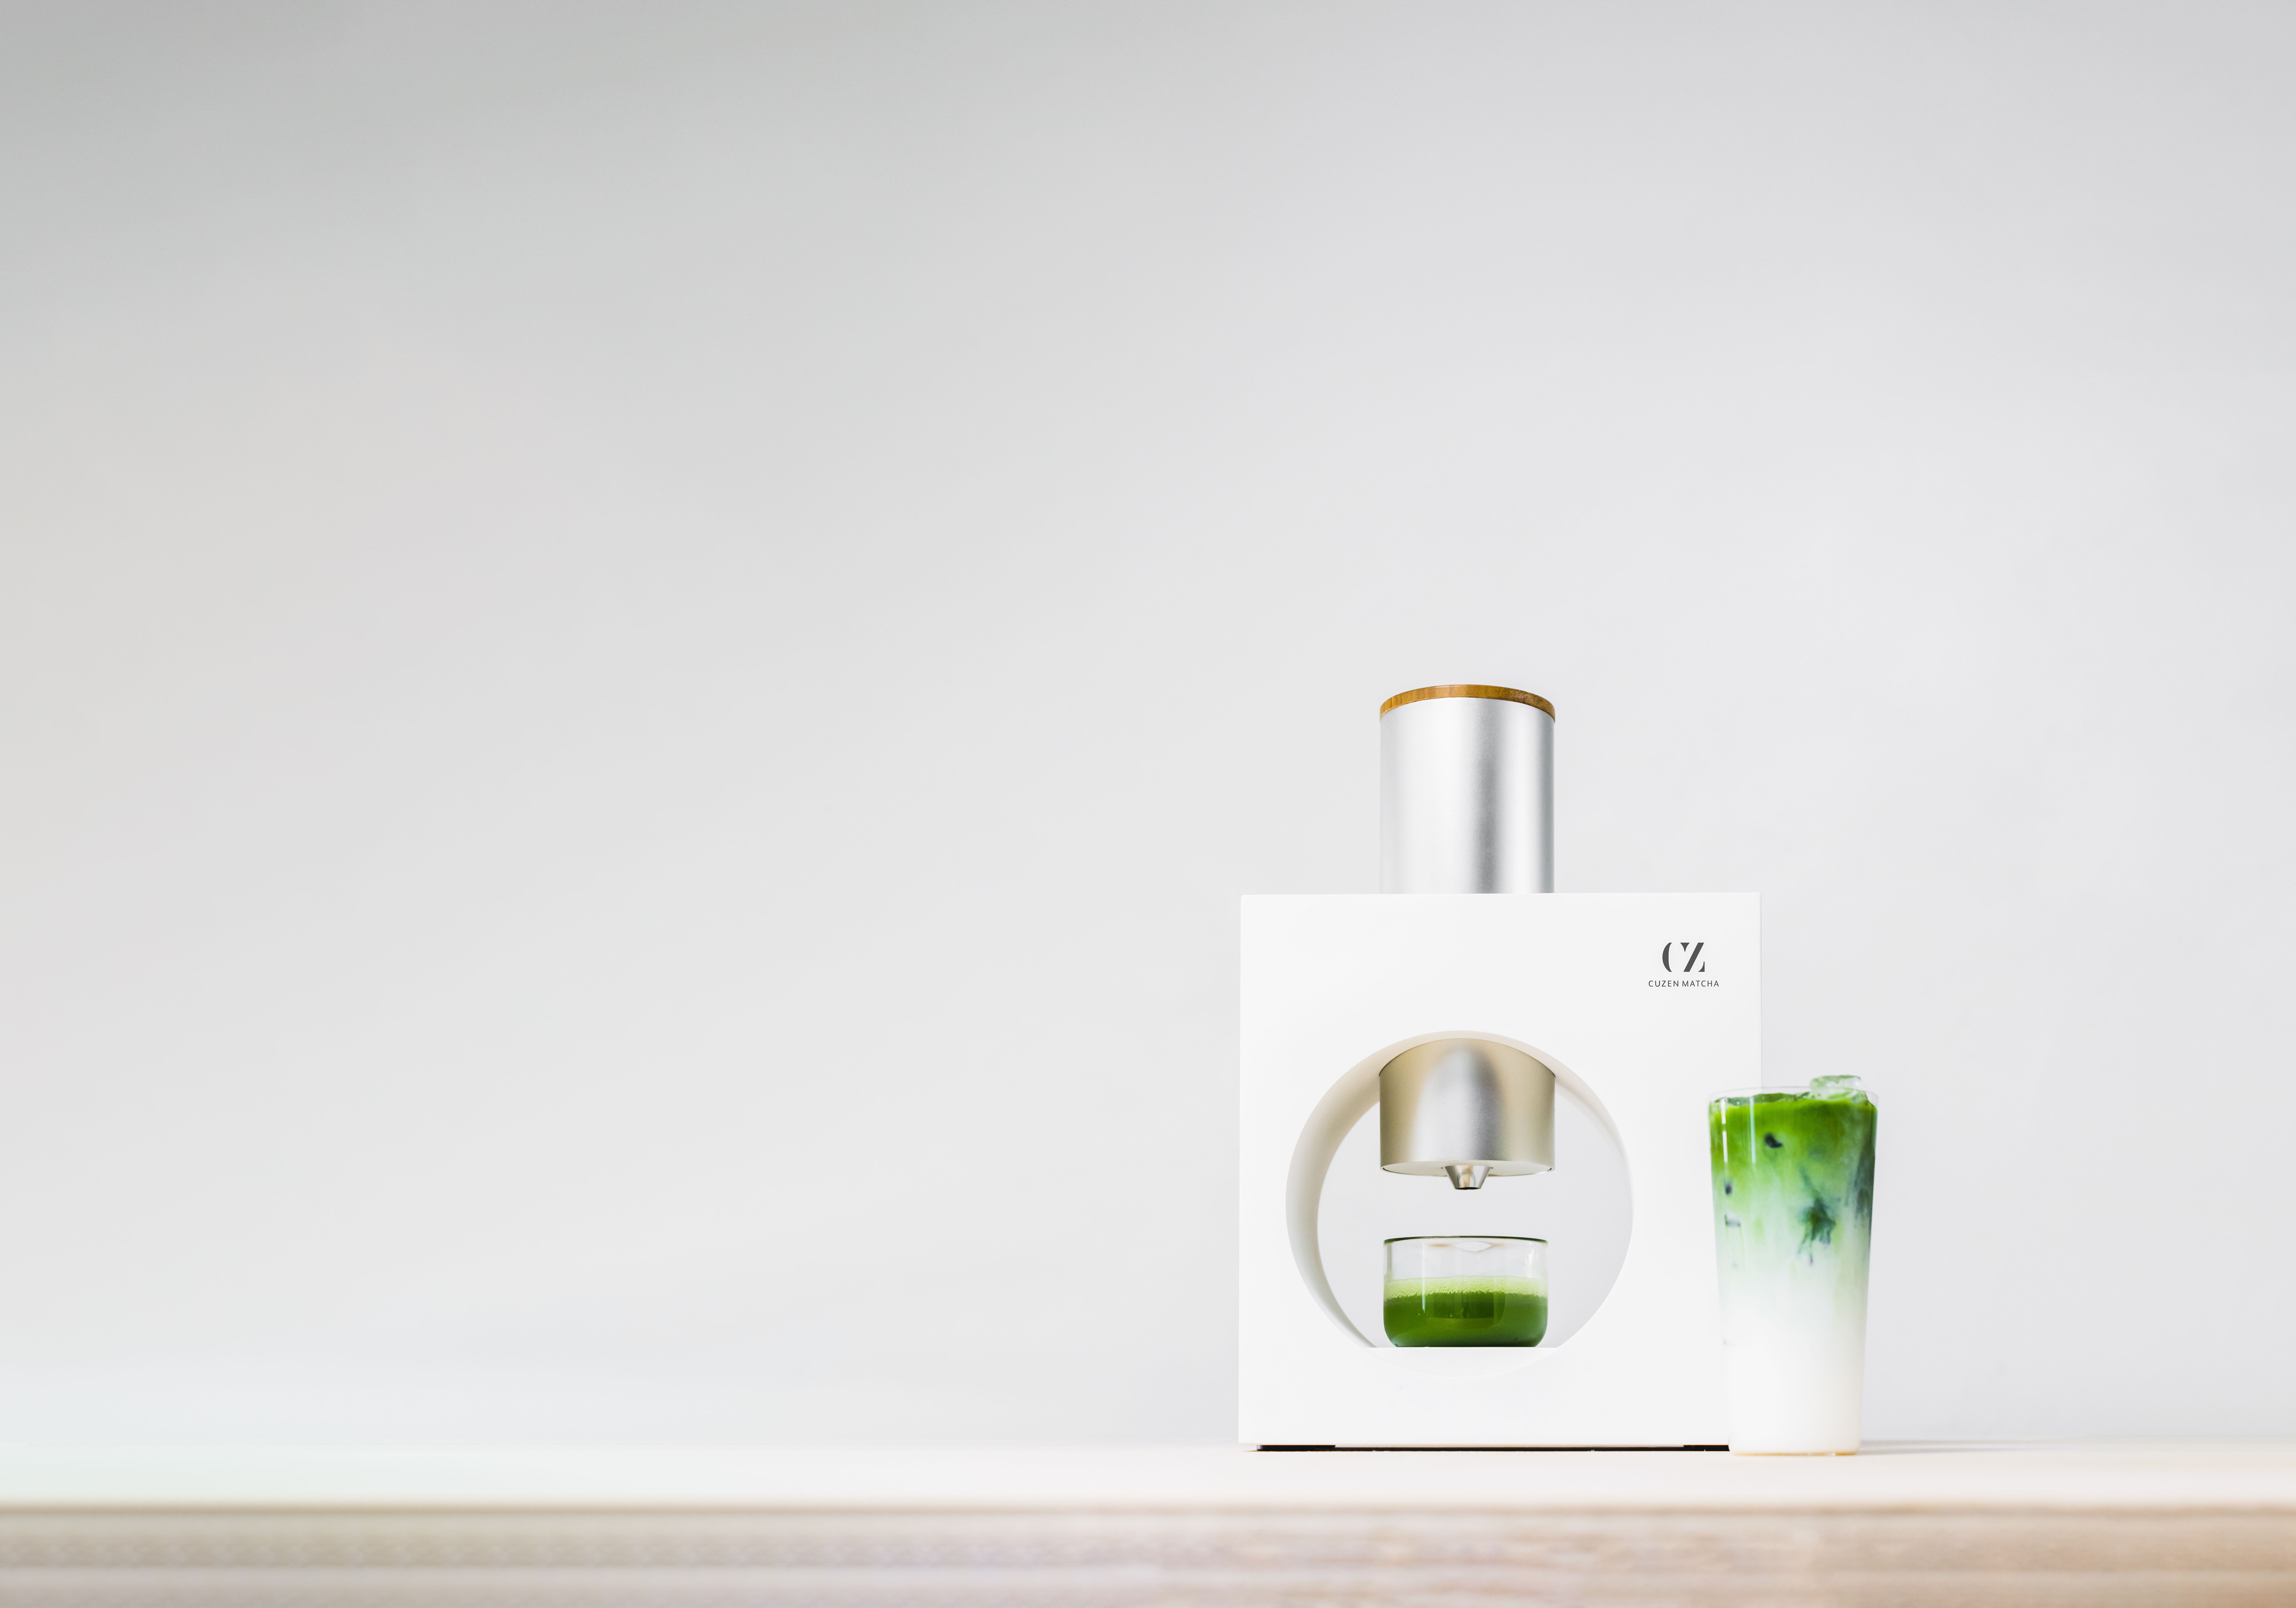 Cuzen Matcha Named to TIME's List of the 100 Best Inventions of 2020